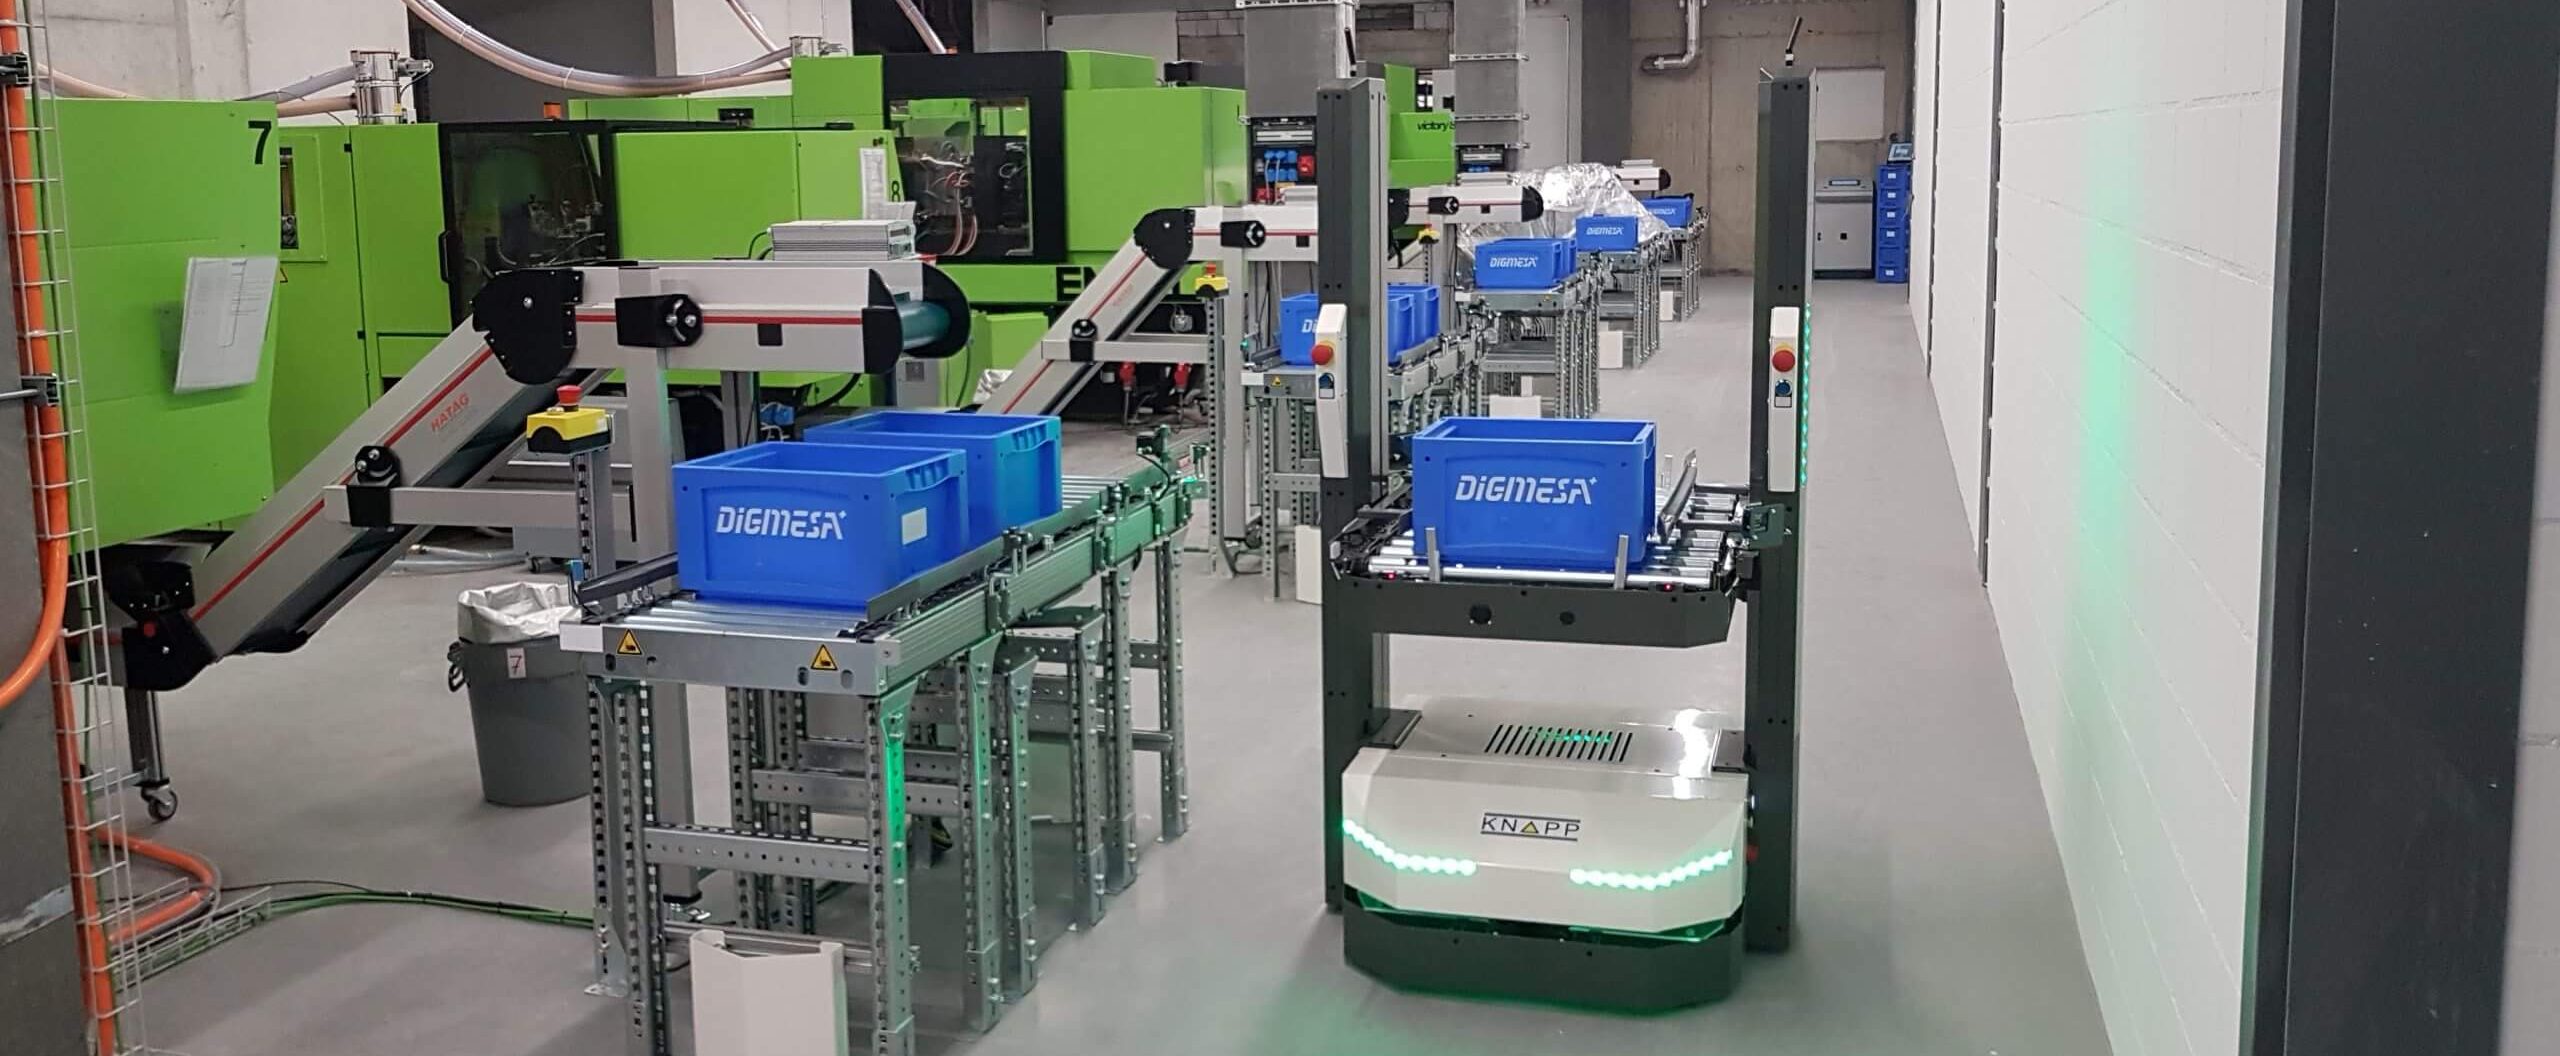 The autonomous intelligent vehicle (AIV) from KNAPP supplies injection molding machines by Digmesa.